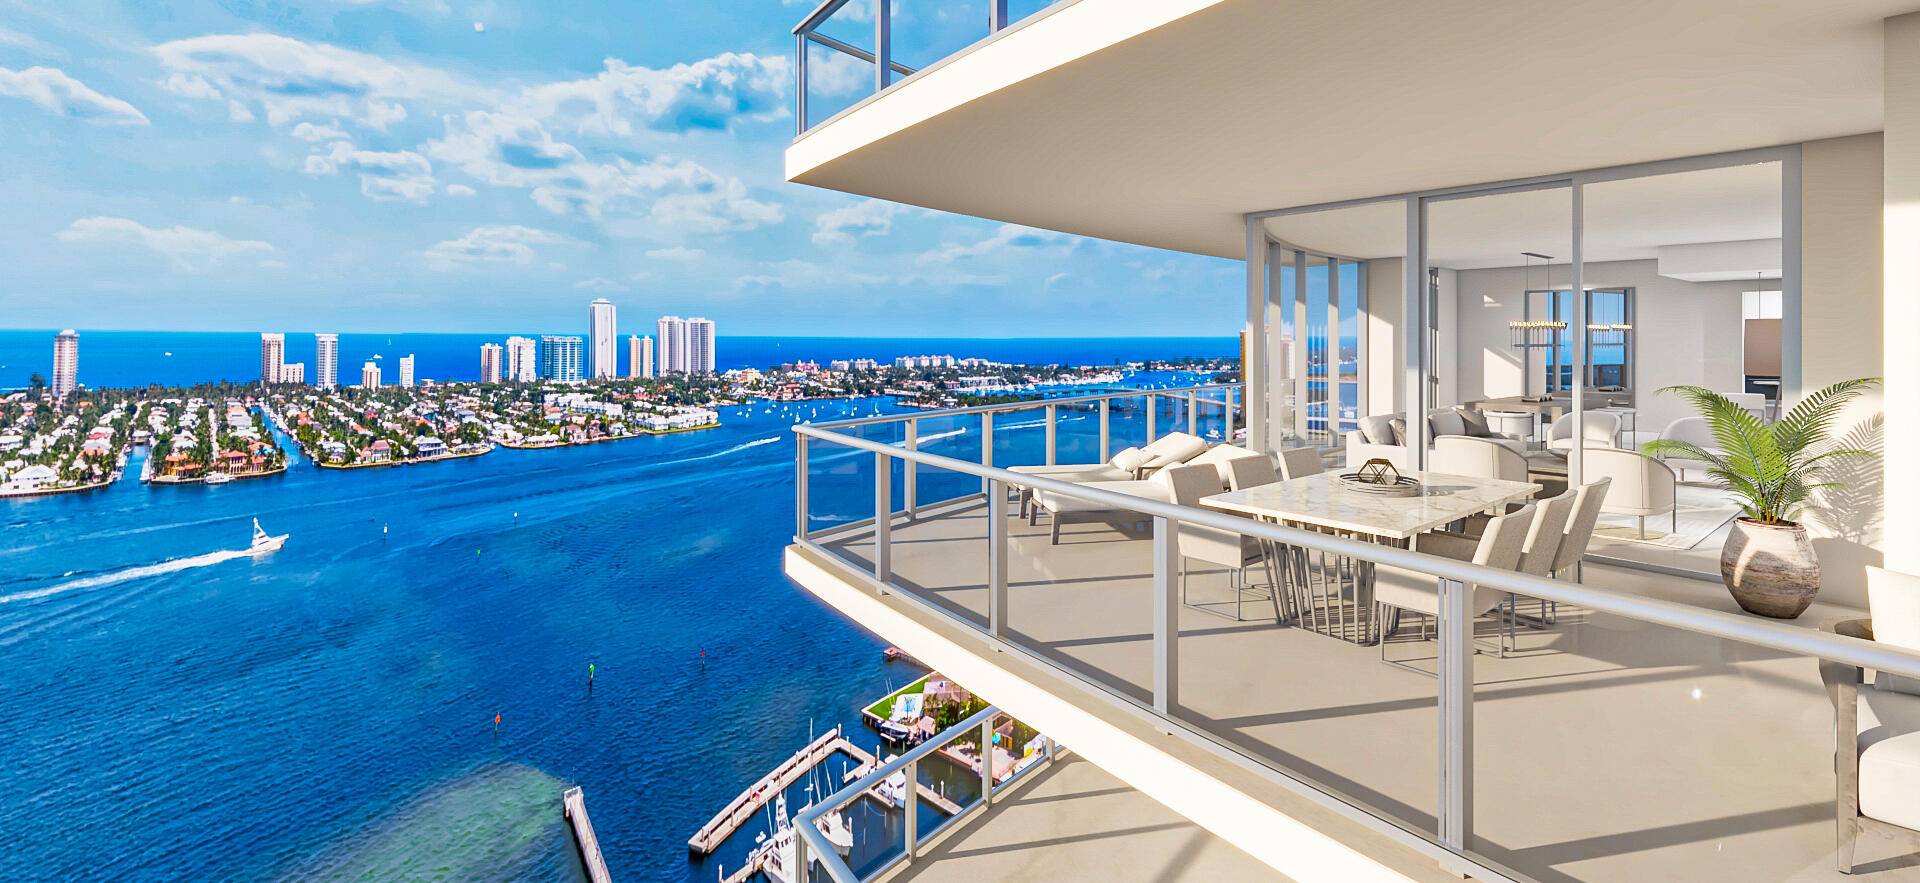 Nautilus 220 is a new luxe waterfront development under construction alongside a marina with 330 condominium residences in two, 24 storytowers, a one acre outdoor amenity deck, the SeaHawk Prime ...